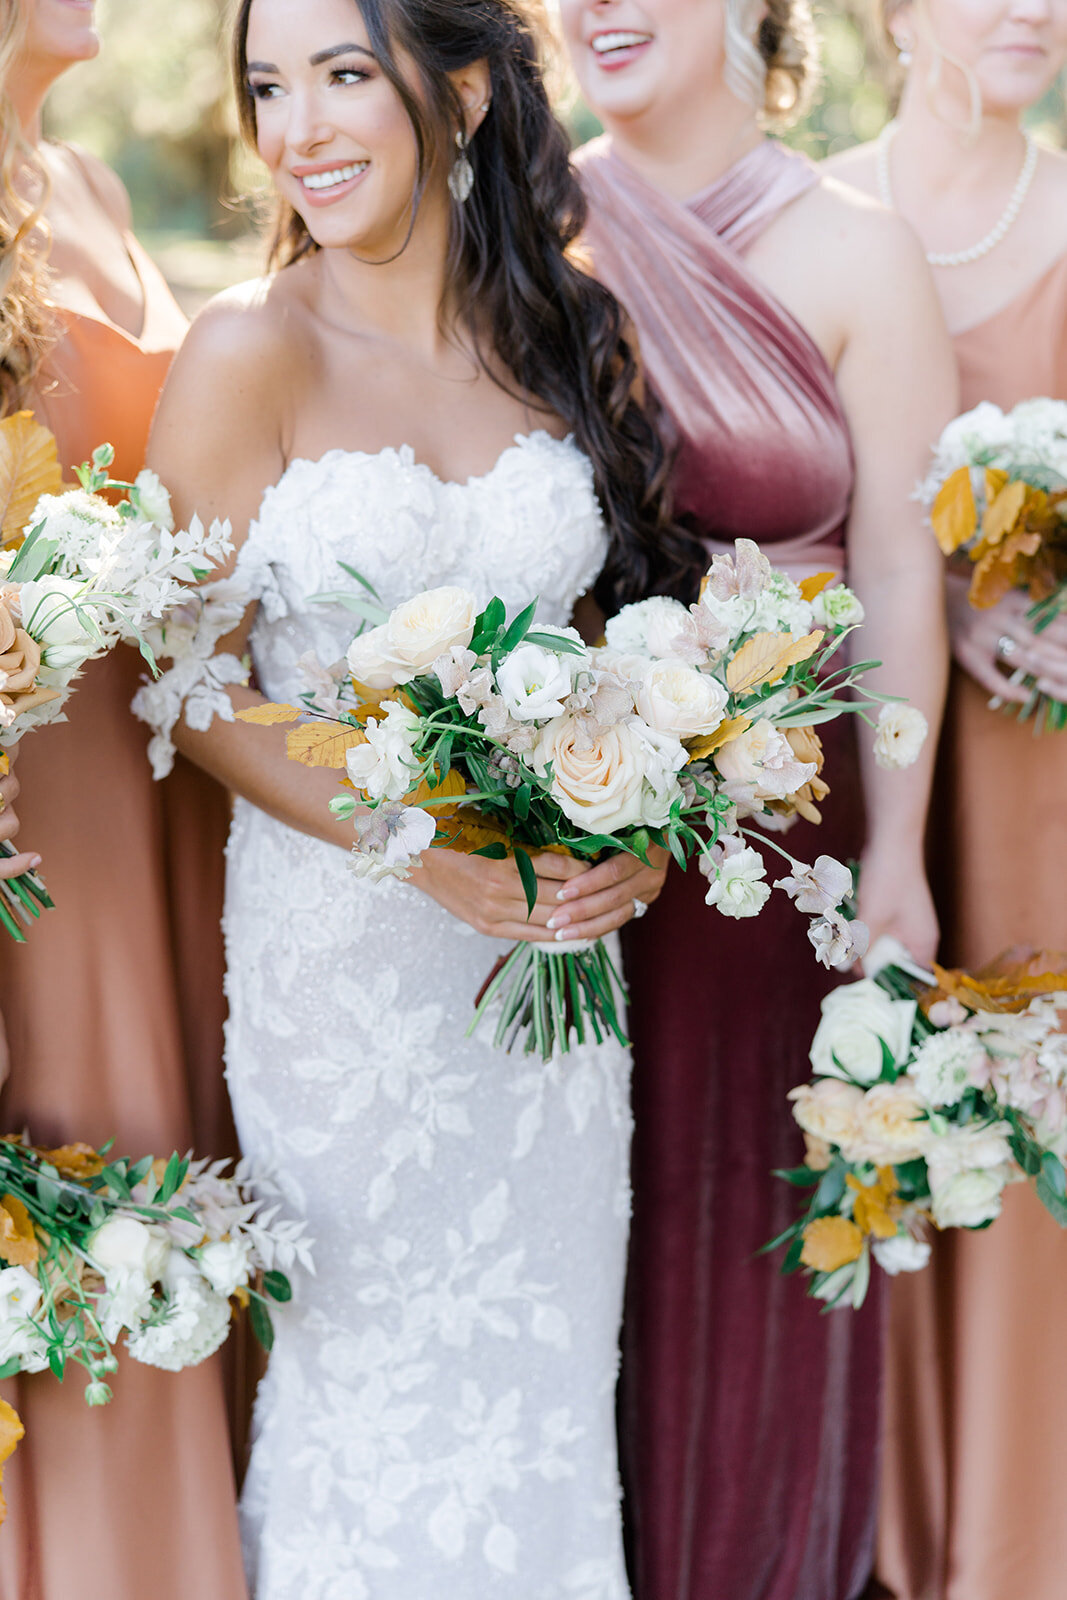 Boone Hall fall wedding. Jewel-toned bridesmaids dresses with maid of honor in a different color.  Kailee DiMeglio Photography.